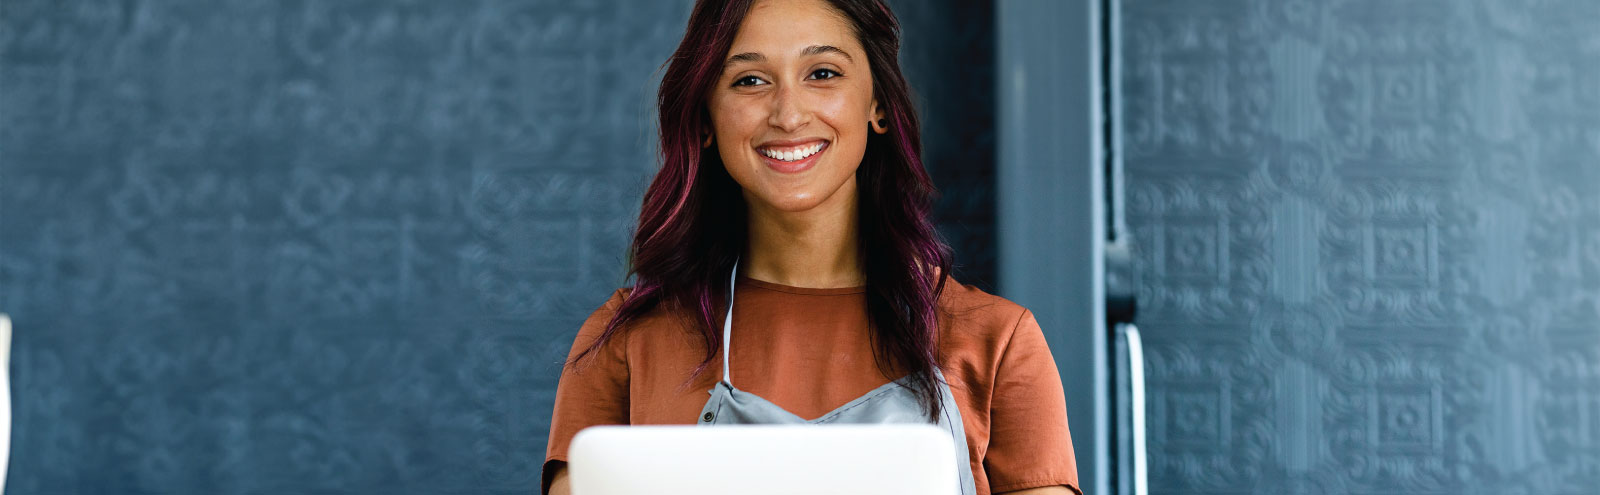 Female business owner smiling at register in front of a blue wall.